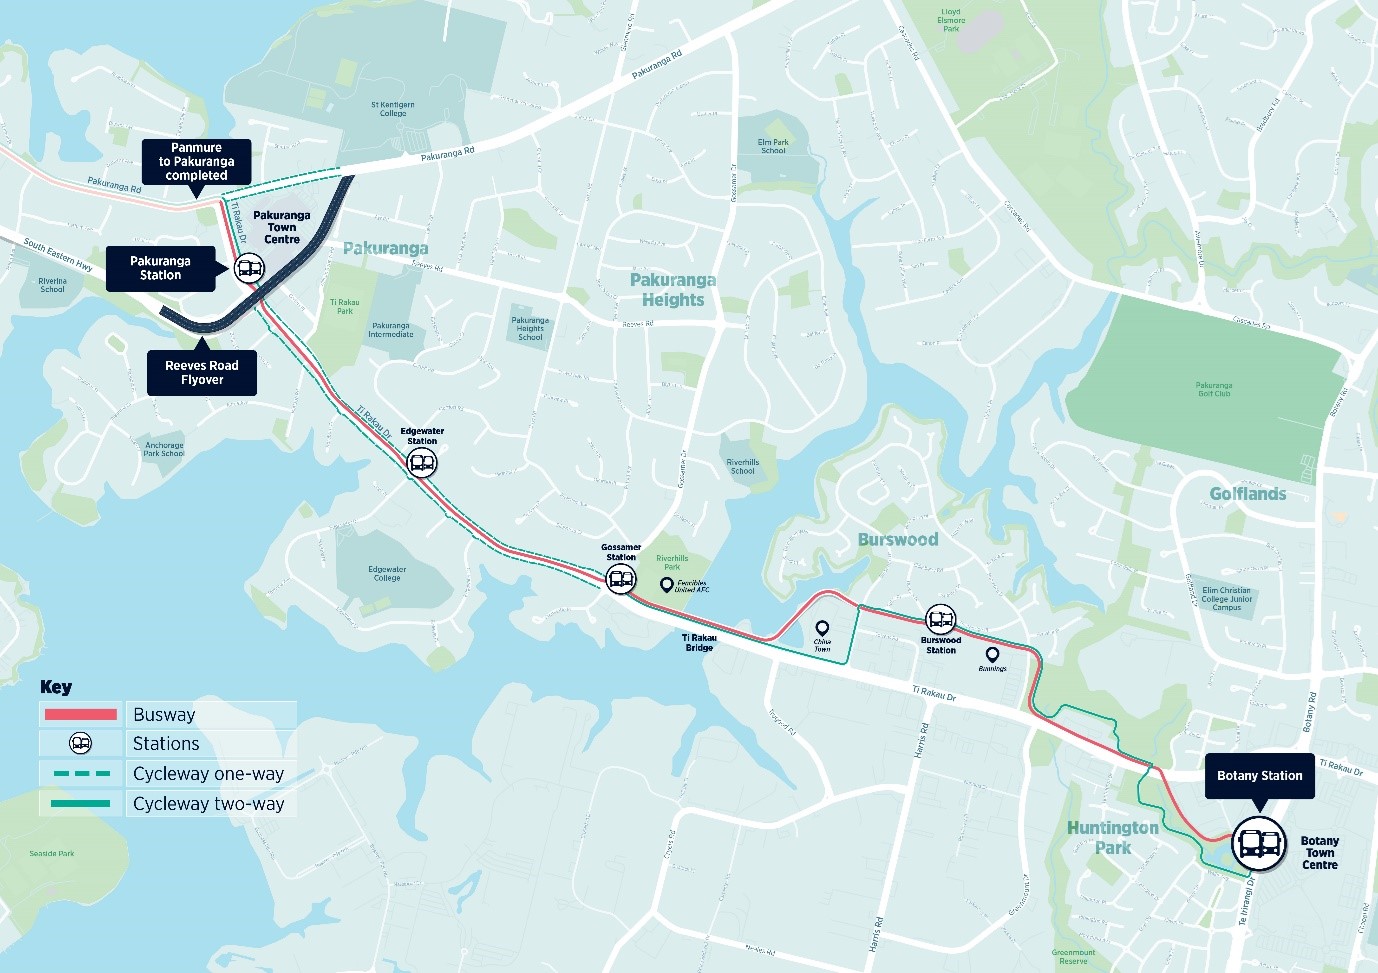 Eastern Busway route from Pakuranga to Botany